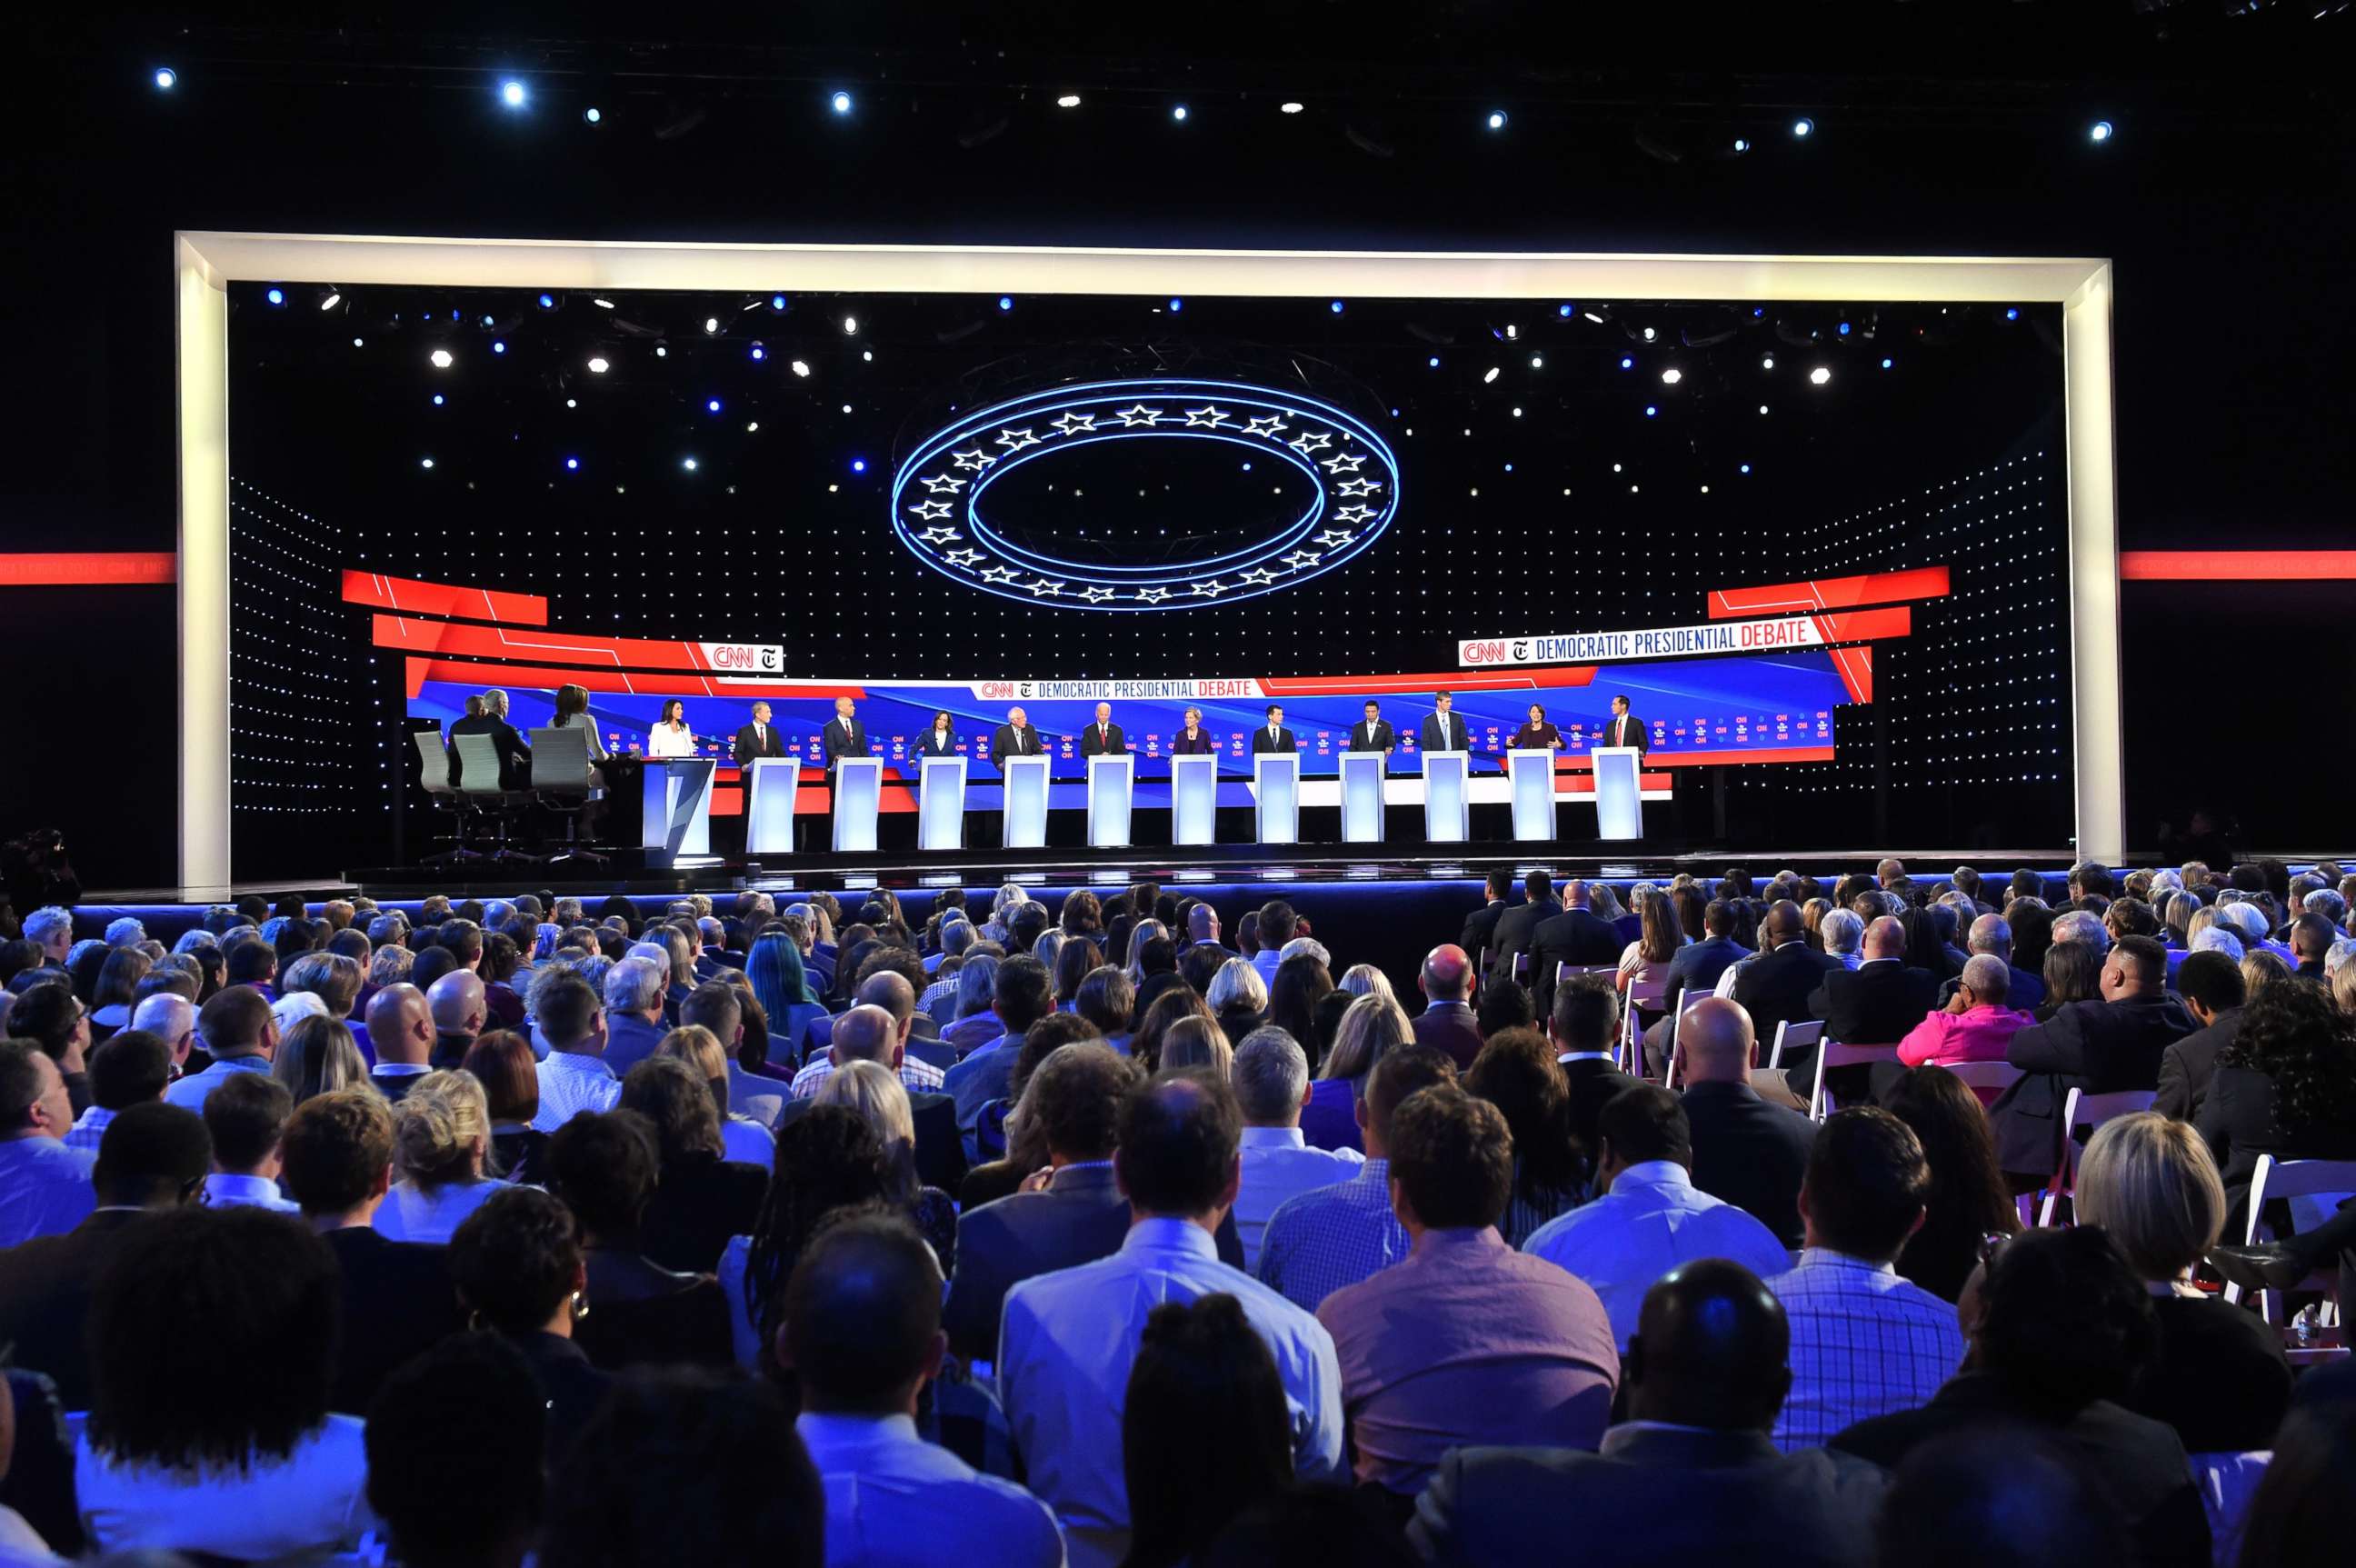 PHOTO: Democratic candidates participate of the fourth Democratic primary debate of the 2020 presidential campaign season co-hosted by The New York Times and CNN at Otterbein University in Westerville, Ohio on October 15, 2019.